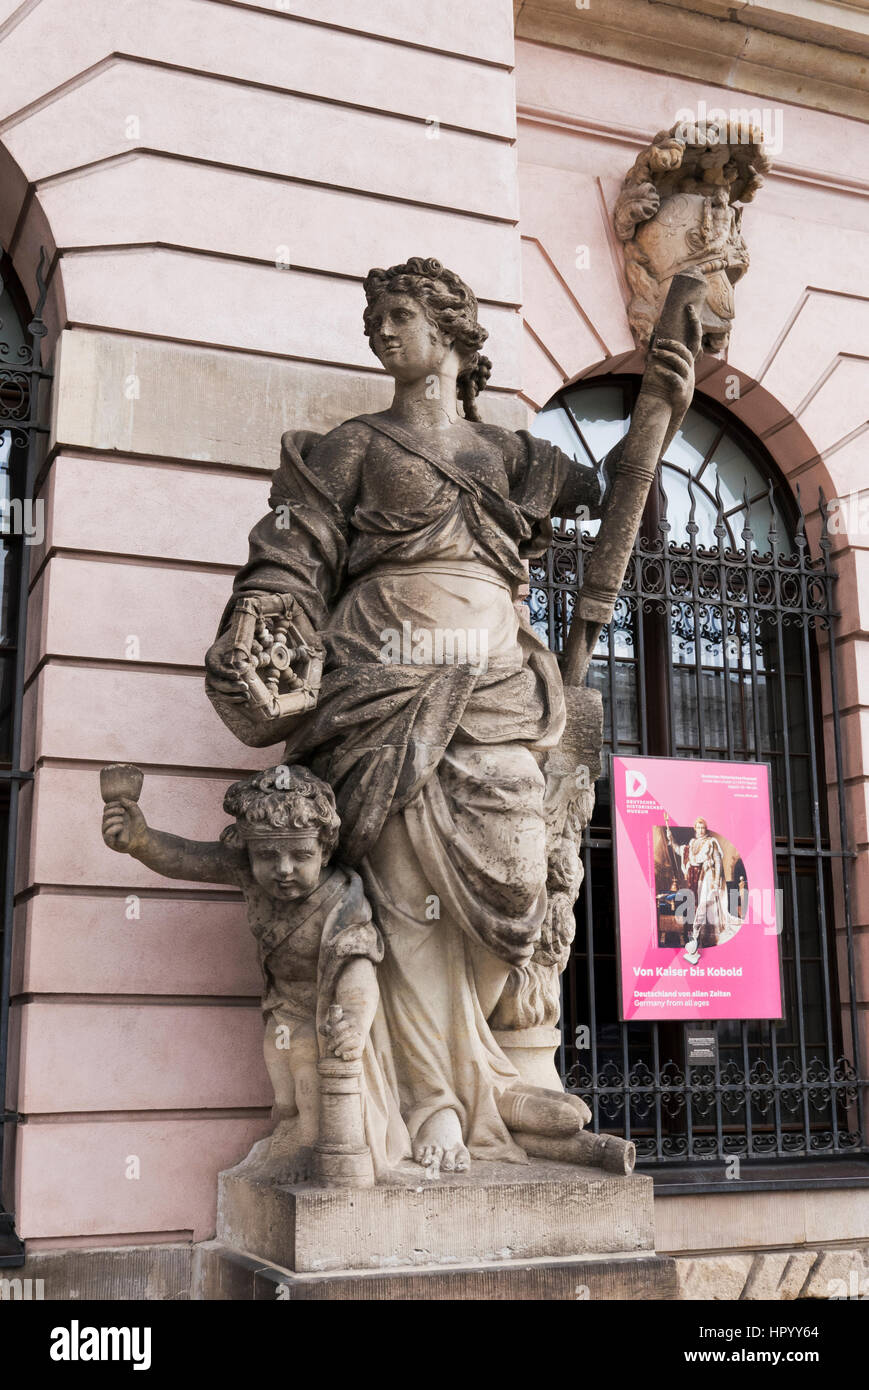 Statues outside the Zeughaus Museum, Berlin, Germany Stock Photo